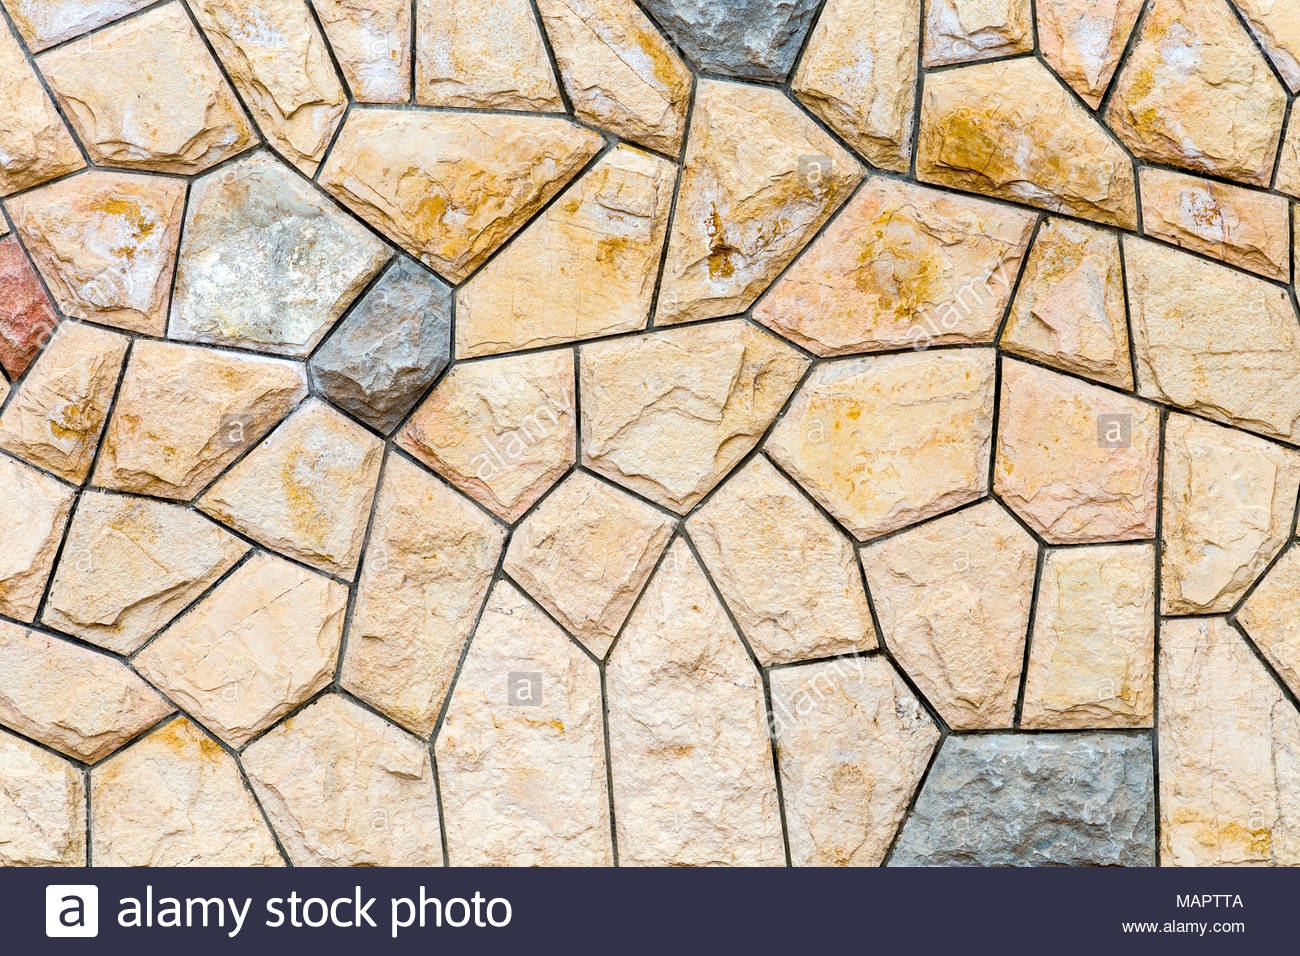 Stone wall made of asymmetrical tiles background Stock Photo 1300x956